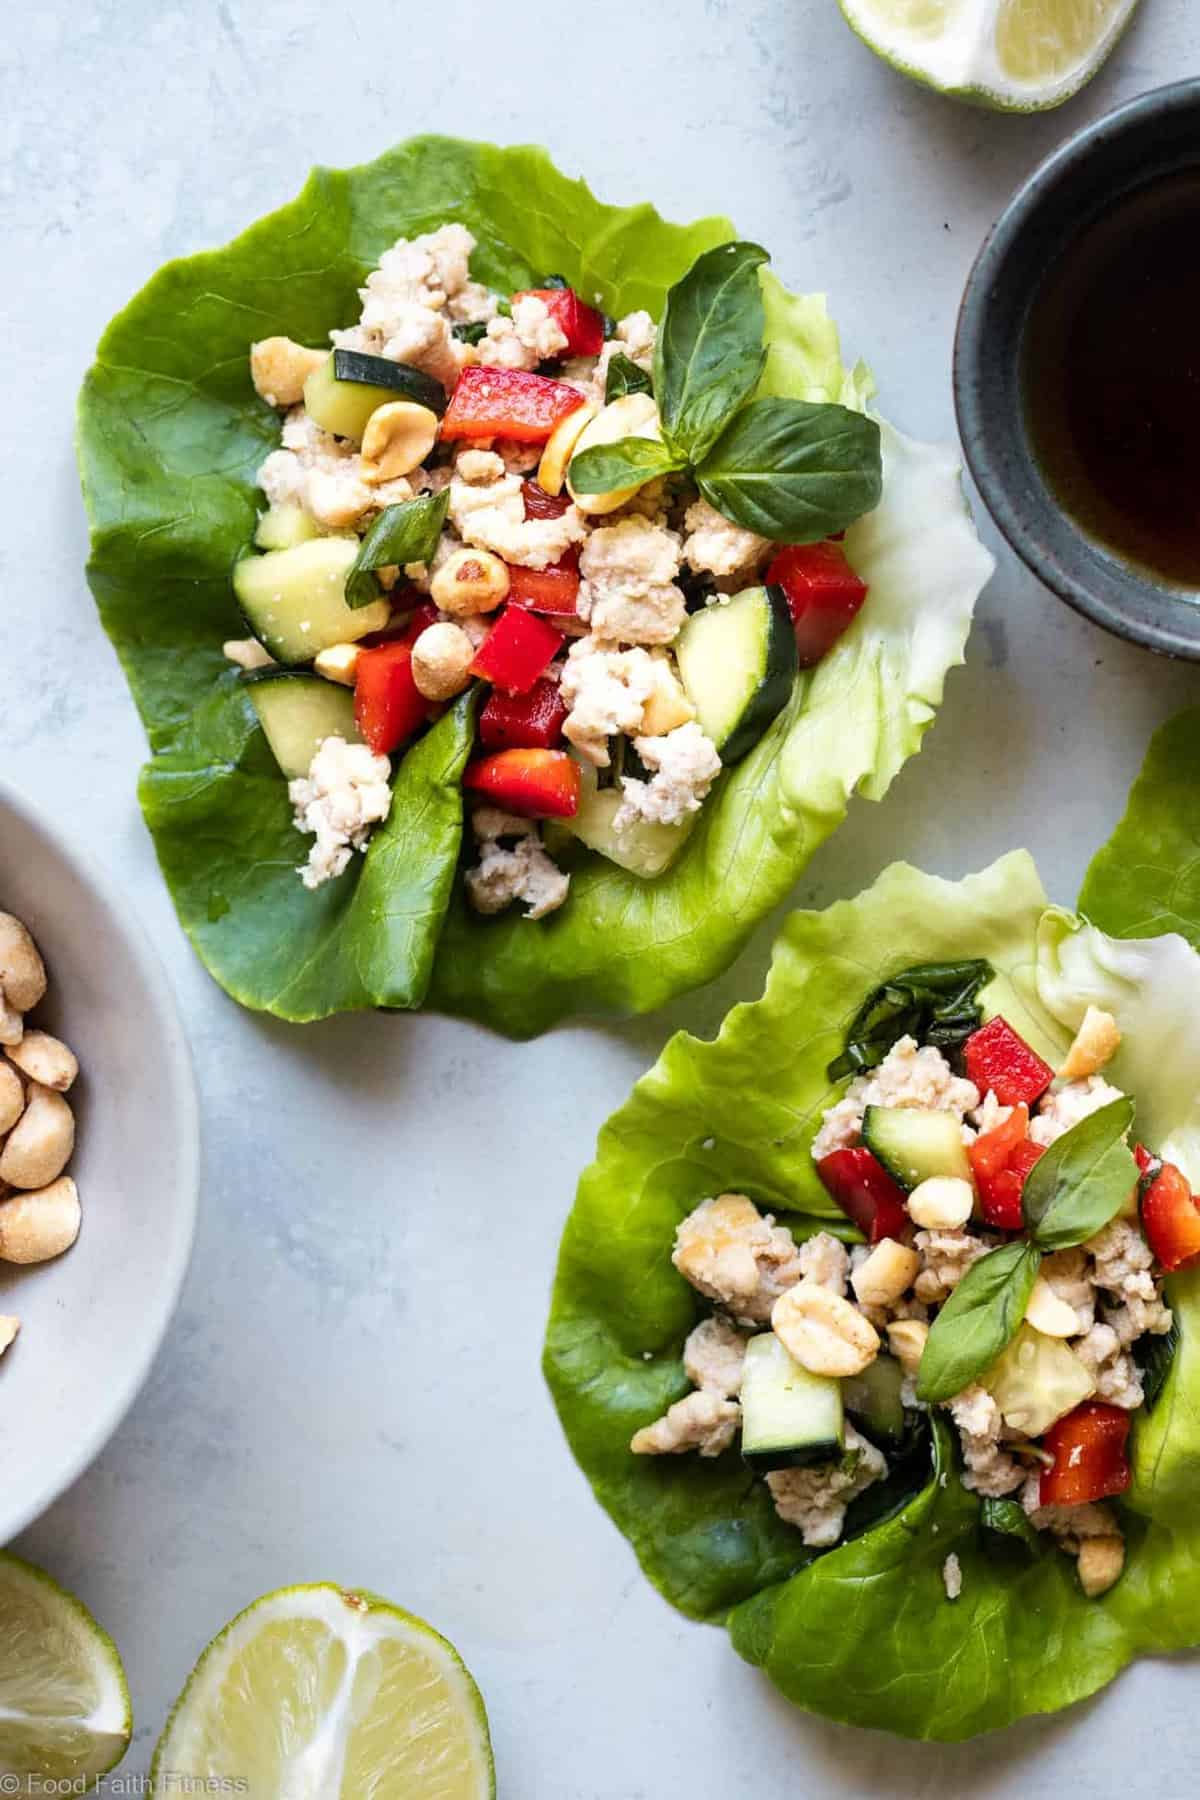 Low Carb Chicken Larb Gai Lettuce Wraps - An easy, healthy twist on a classic Thai salad! They're low carb, paleo friendly and super easy to make! Great for quick weeknight dinners! | #Foodfaithfitness | #glutenfree #lowcarb #paleo #healthy #Thai